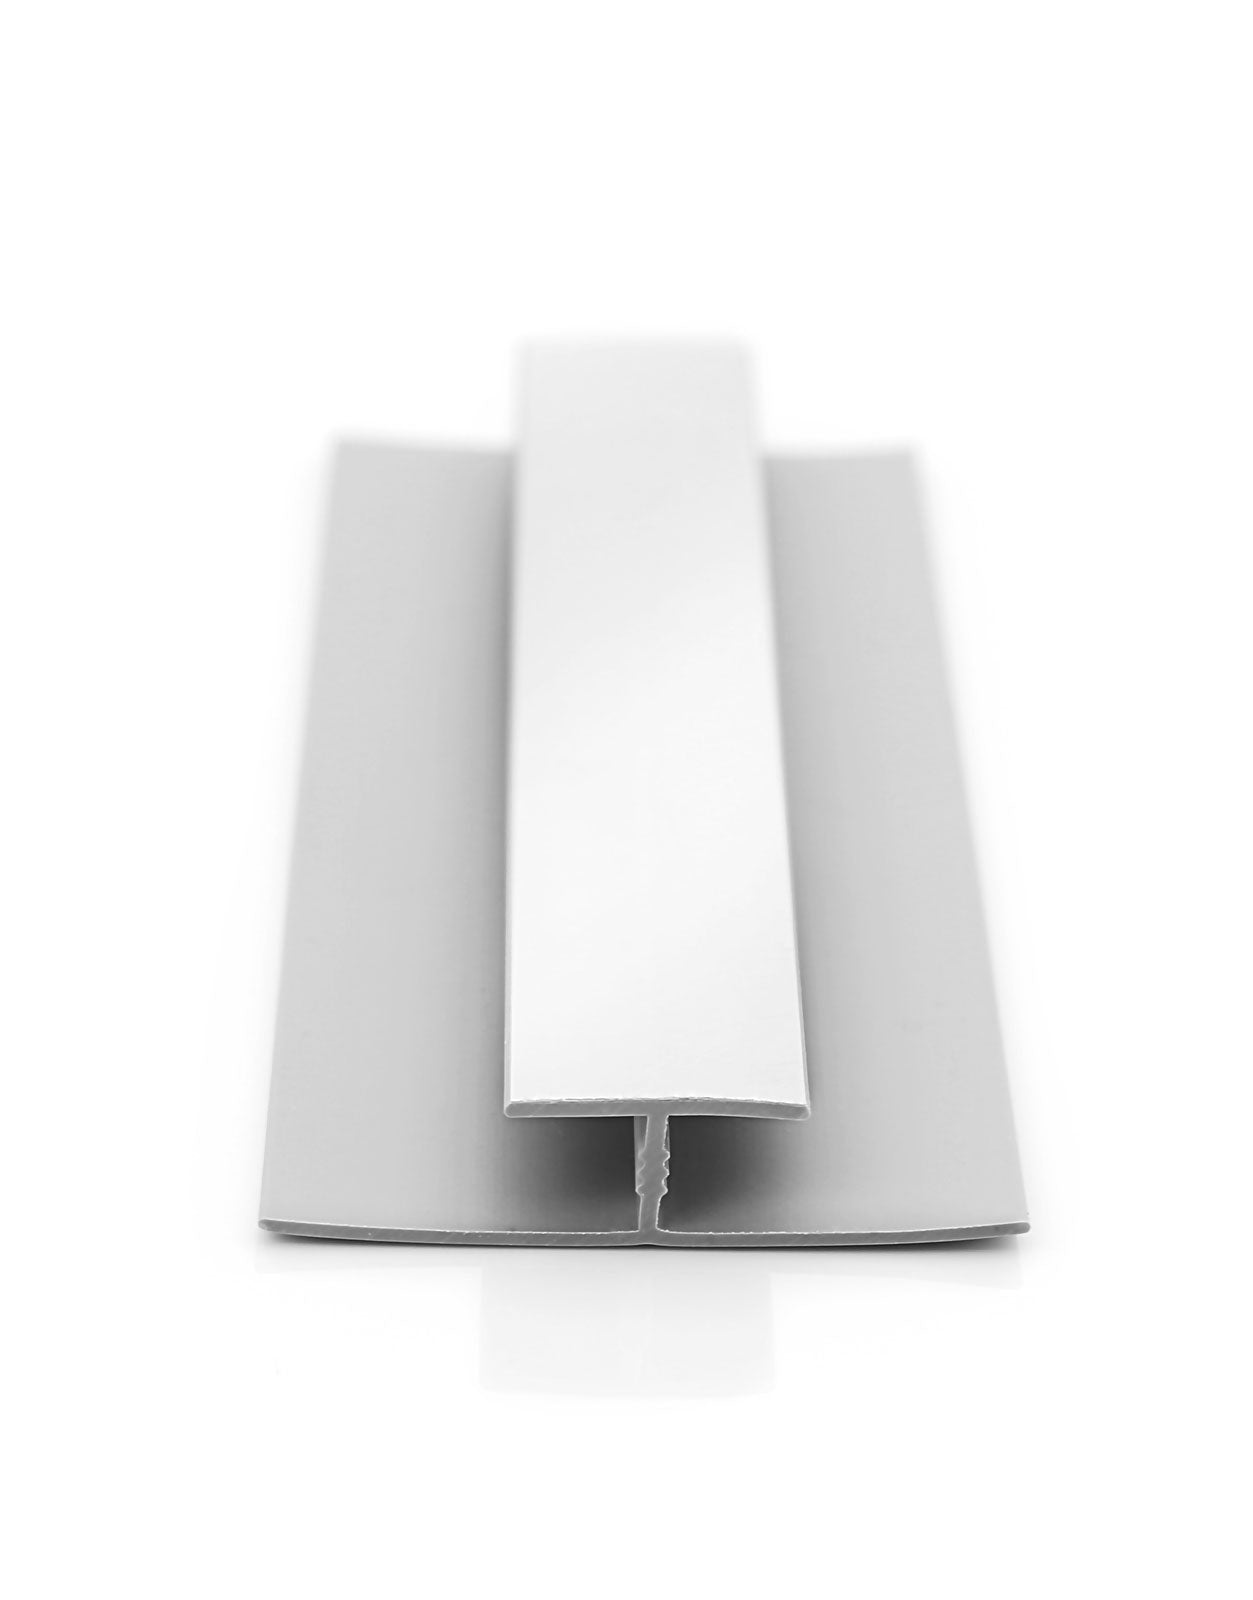 H Joint White Ceiling Trim 2700mm X 5mm